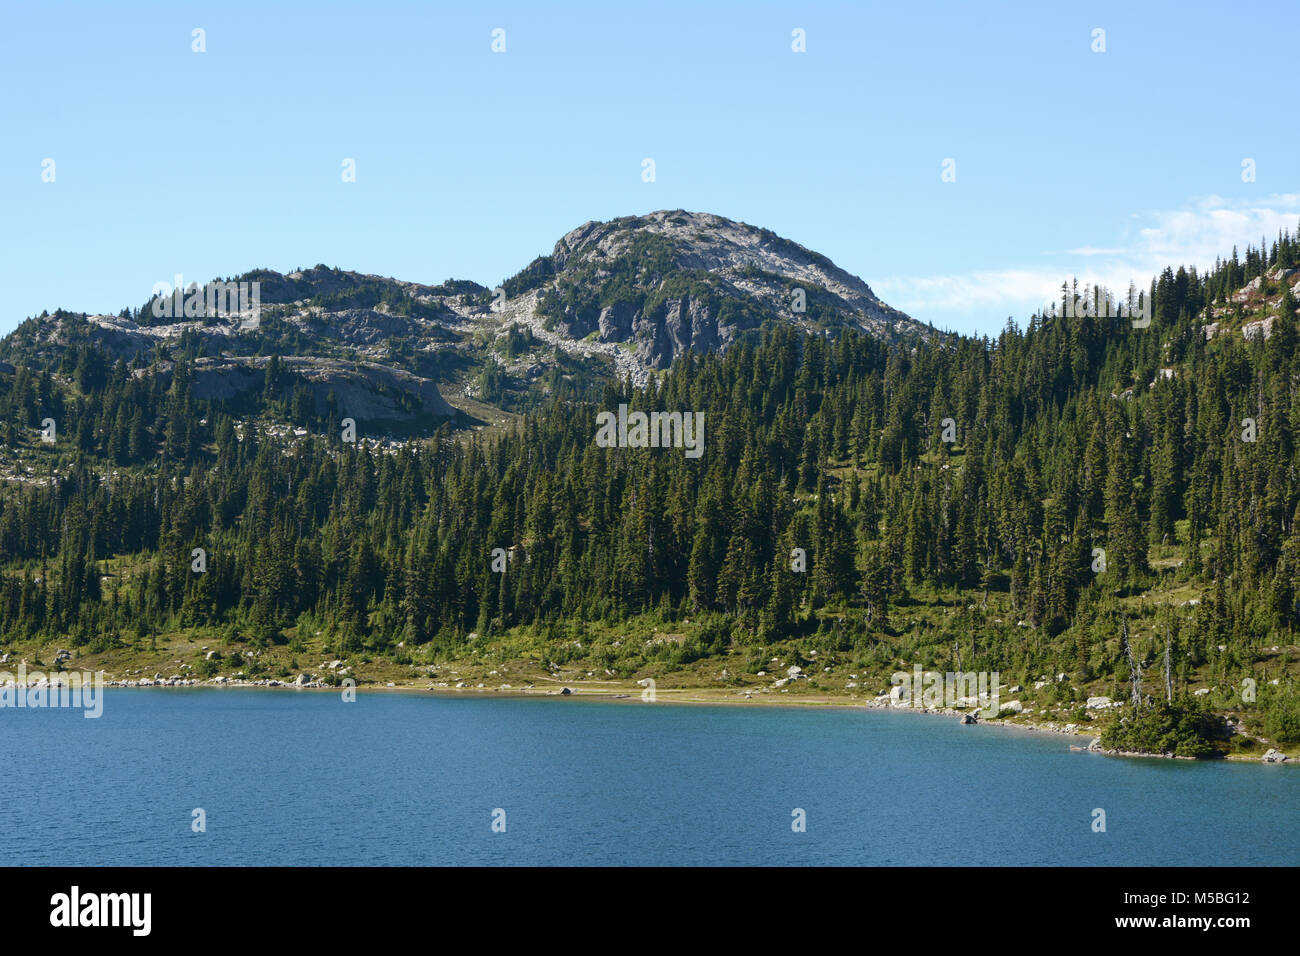 Rainbow Lake, a subalpine lake in the Coast Mountains, popular for hiking and camping, above the town of Whistler, British Columbia, Canada. Stock Photo